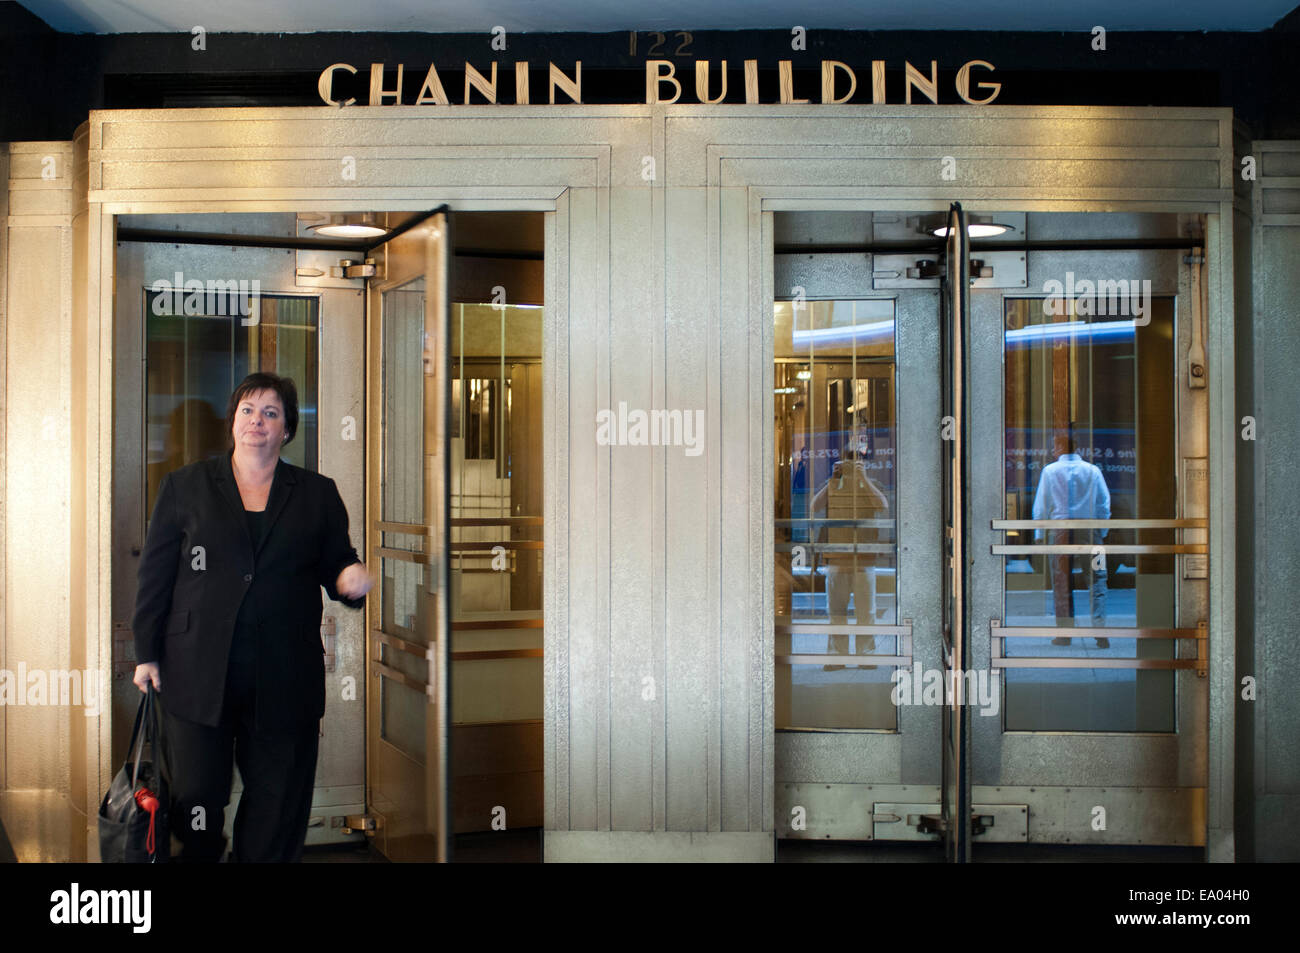 Chanin Building, NYC. The Chanin Building is a brick and terra-cotta skyscraper located at 122 East 42nd Street, at the corner o Stock Photo